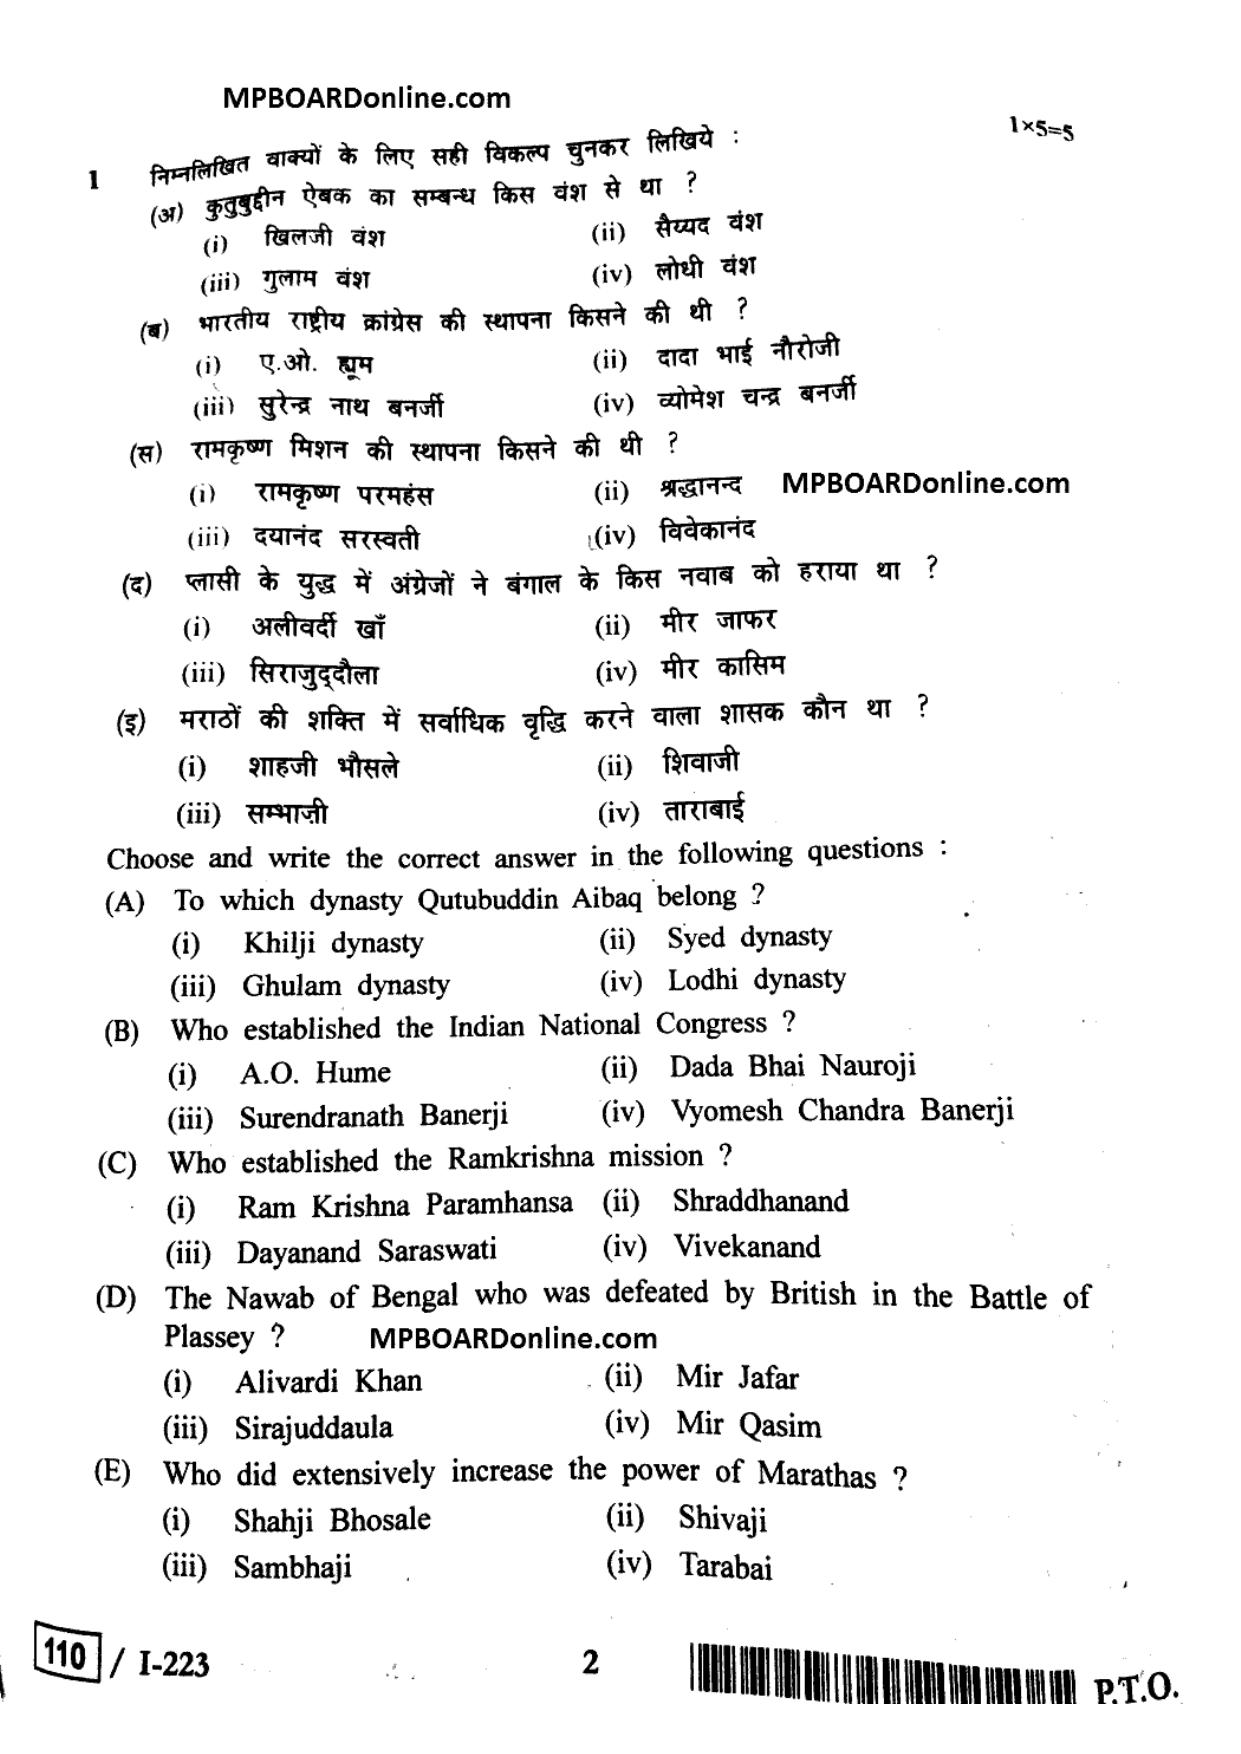 MP Board Class 12 History 2018 Question Paper - Page 2